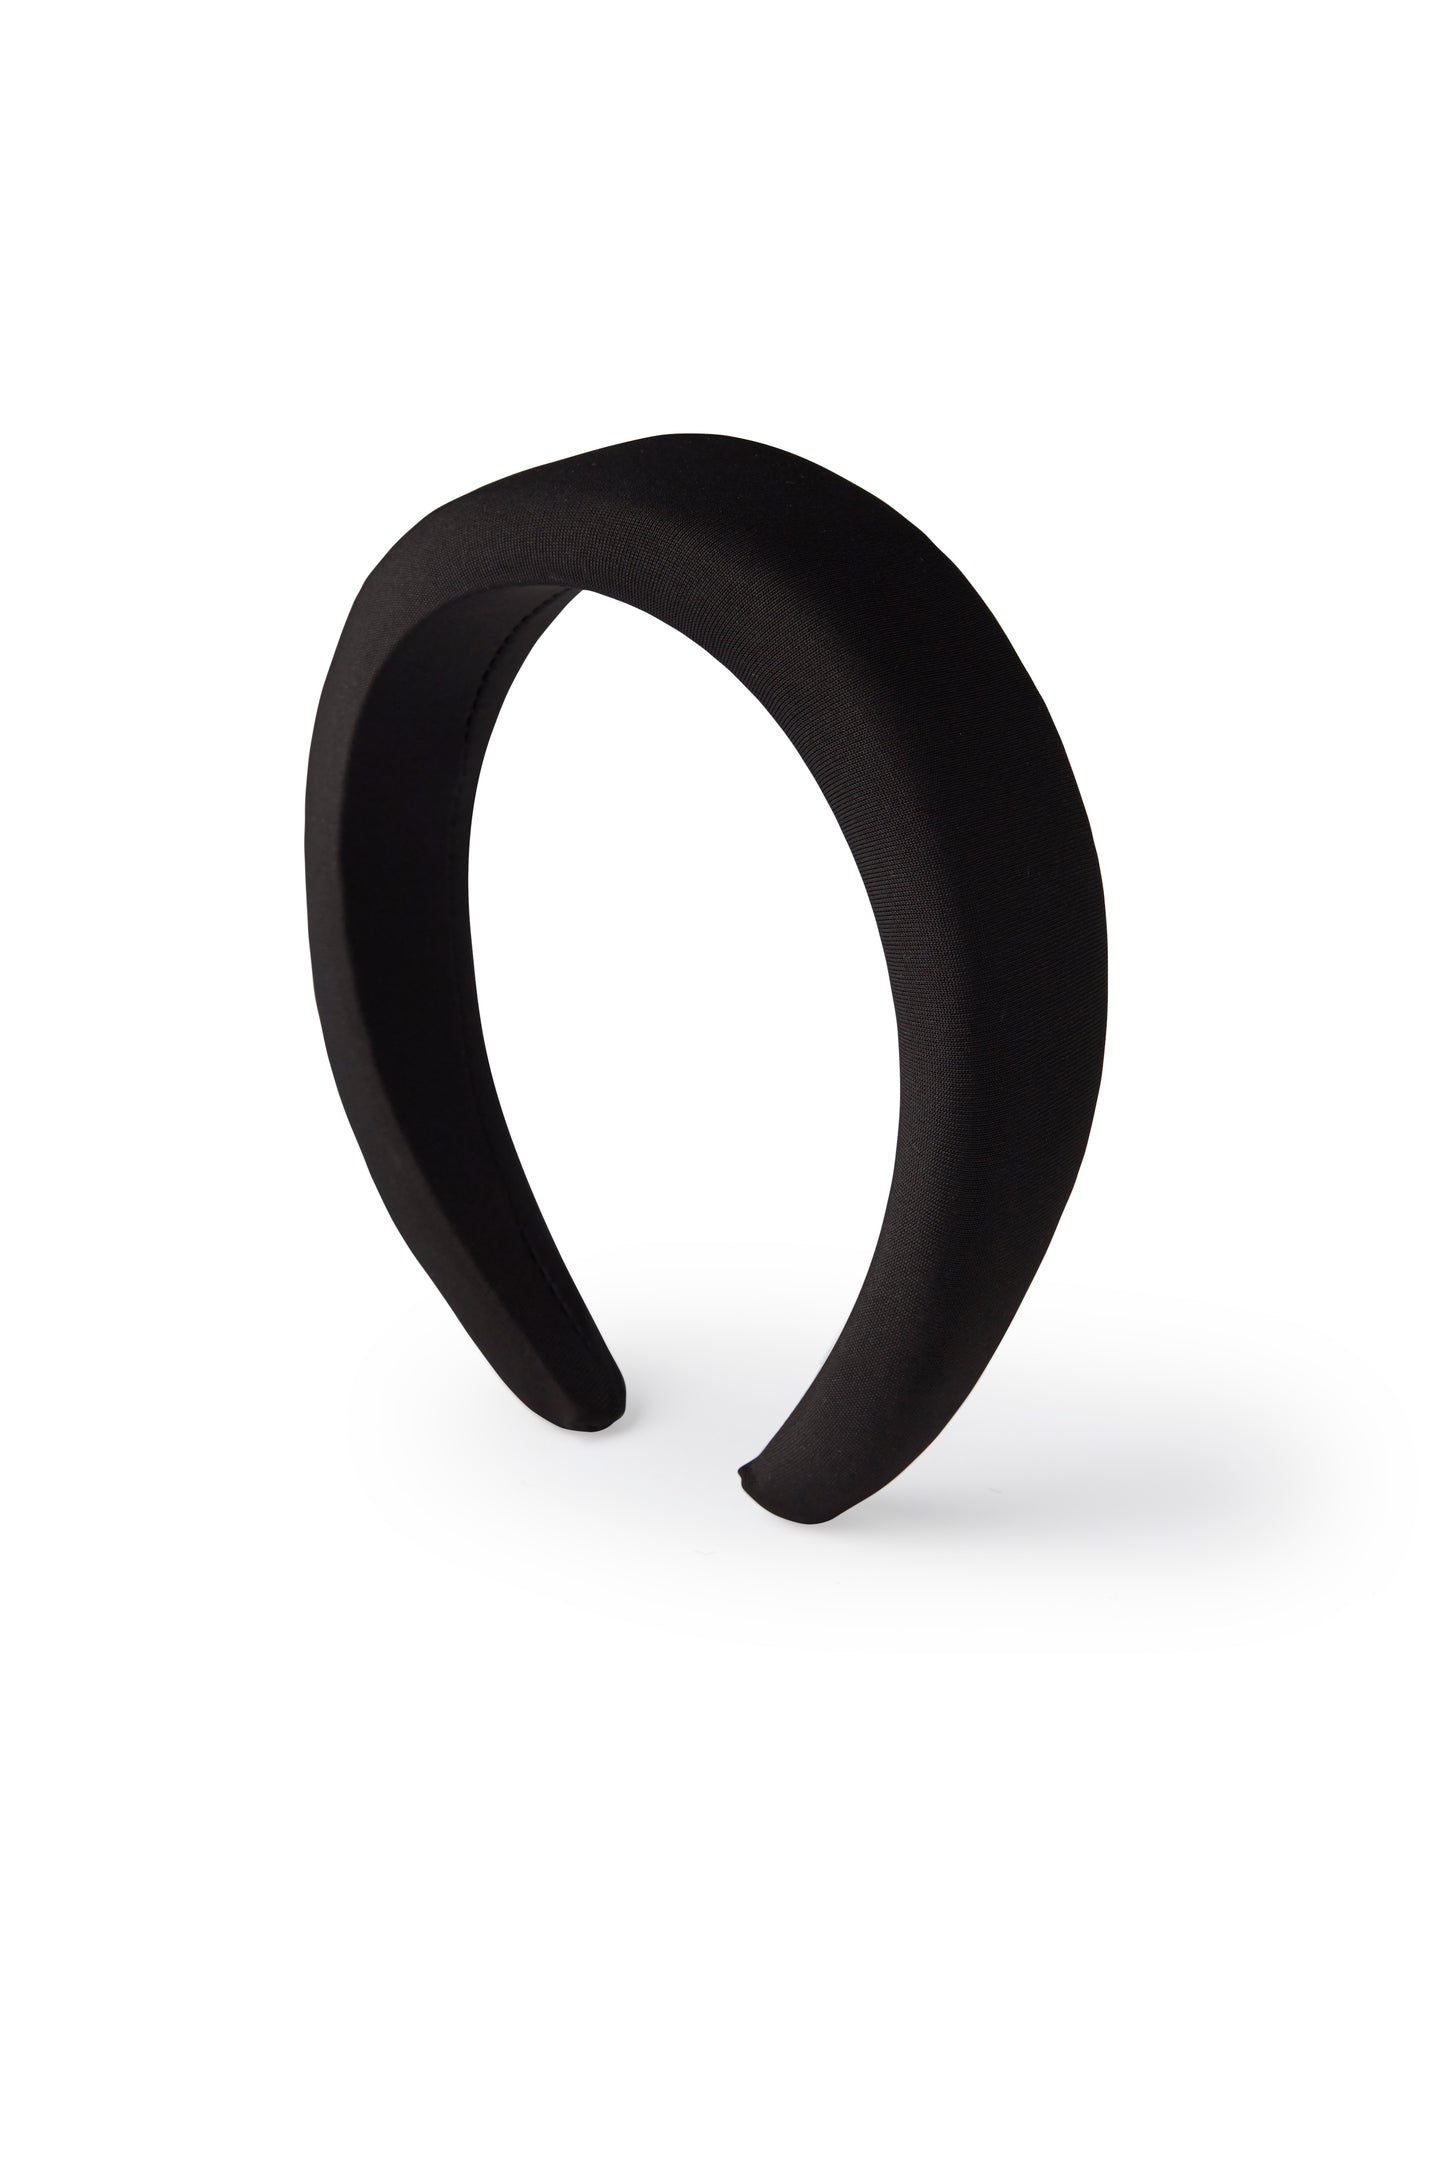 Padded hairband in black color